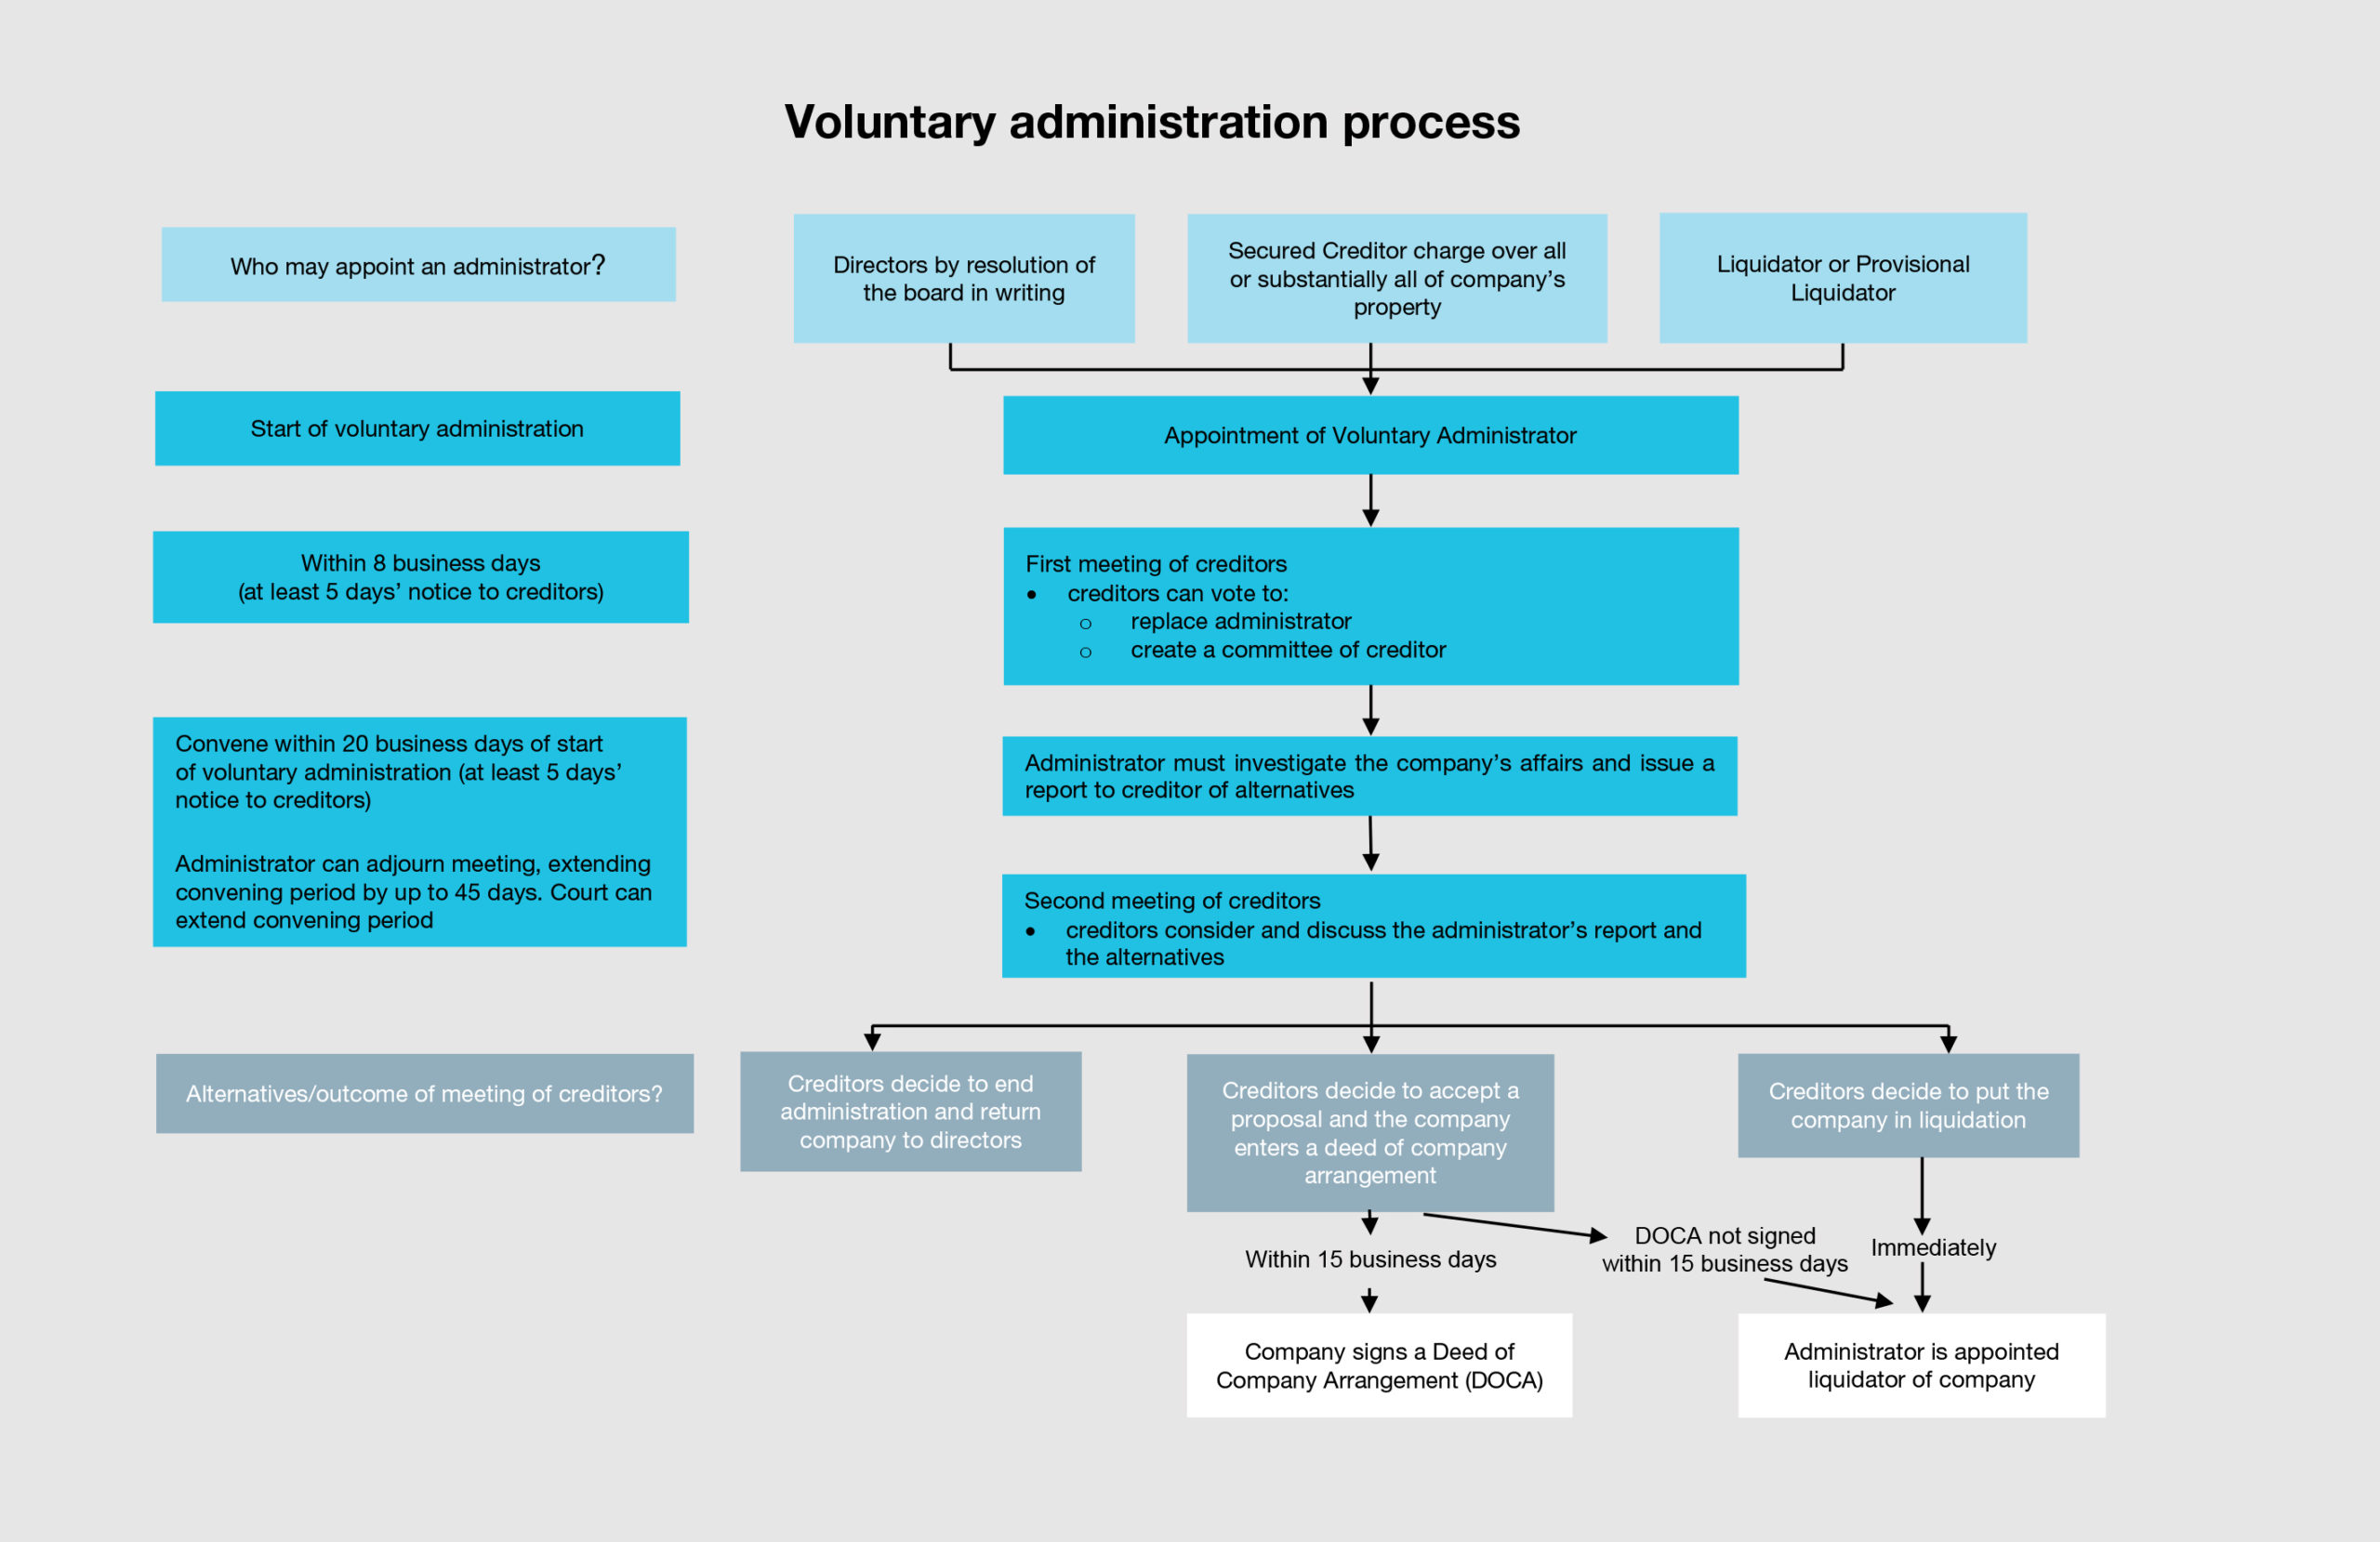 flow chart showing the voluntary administraton process